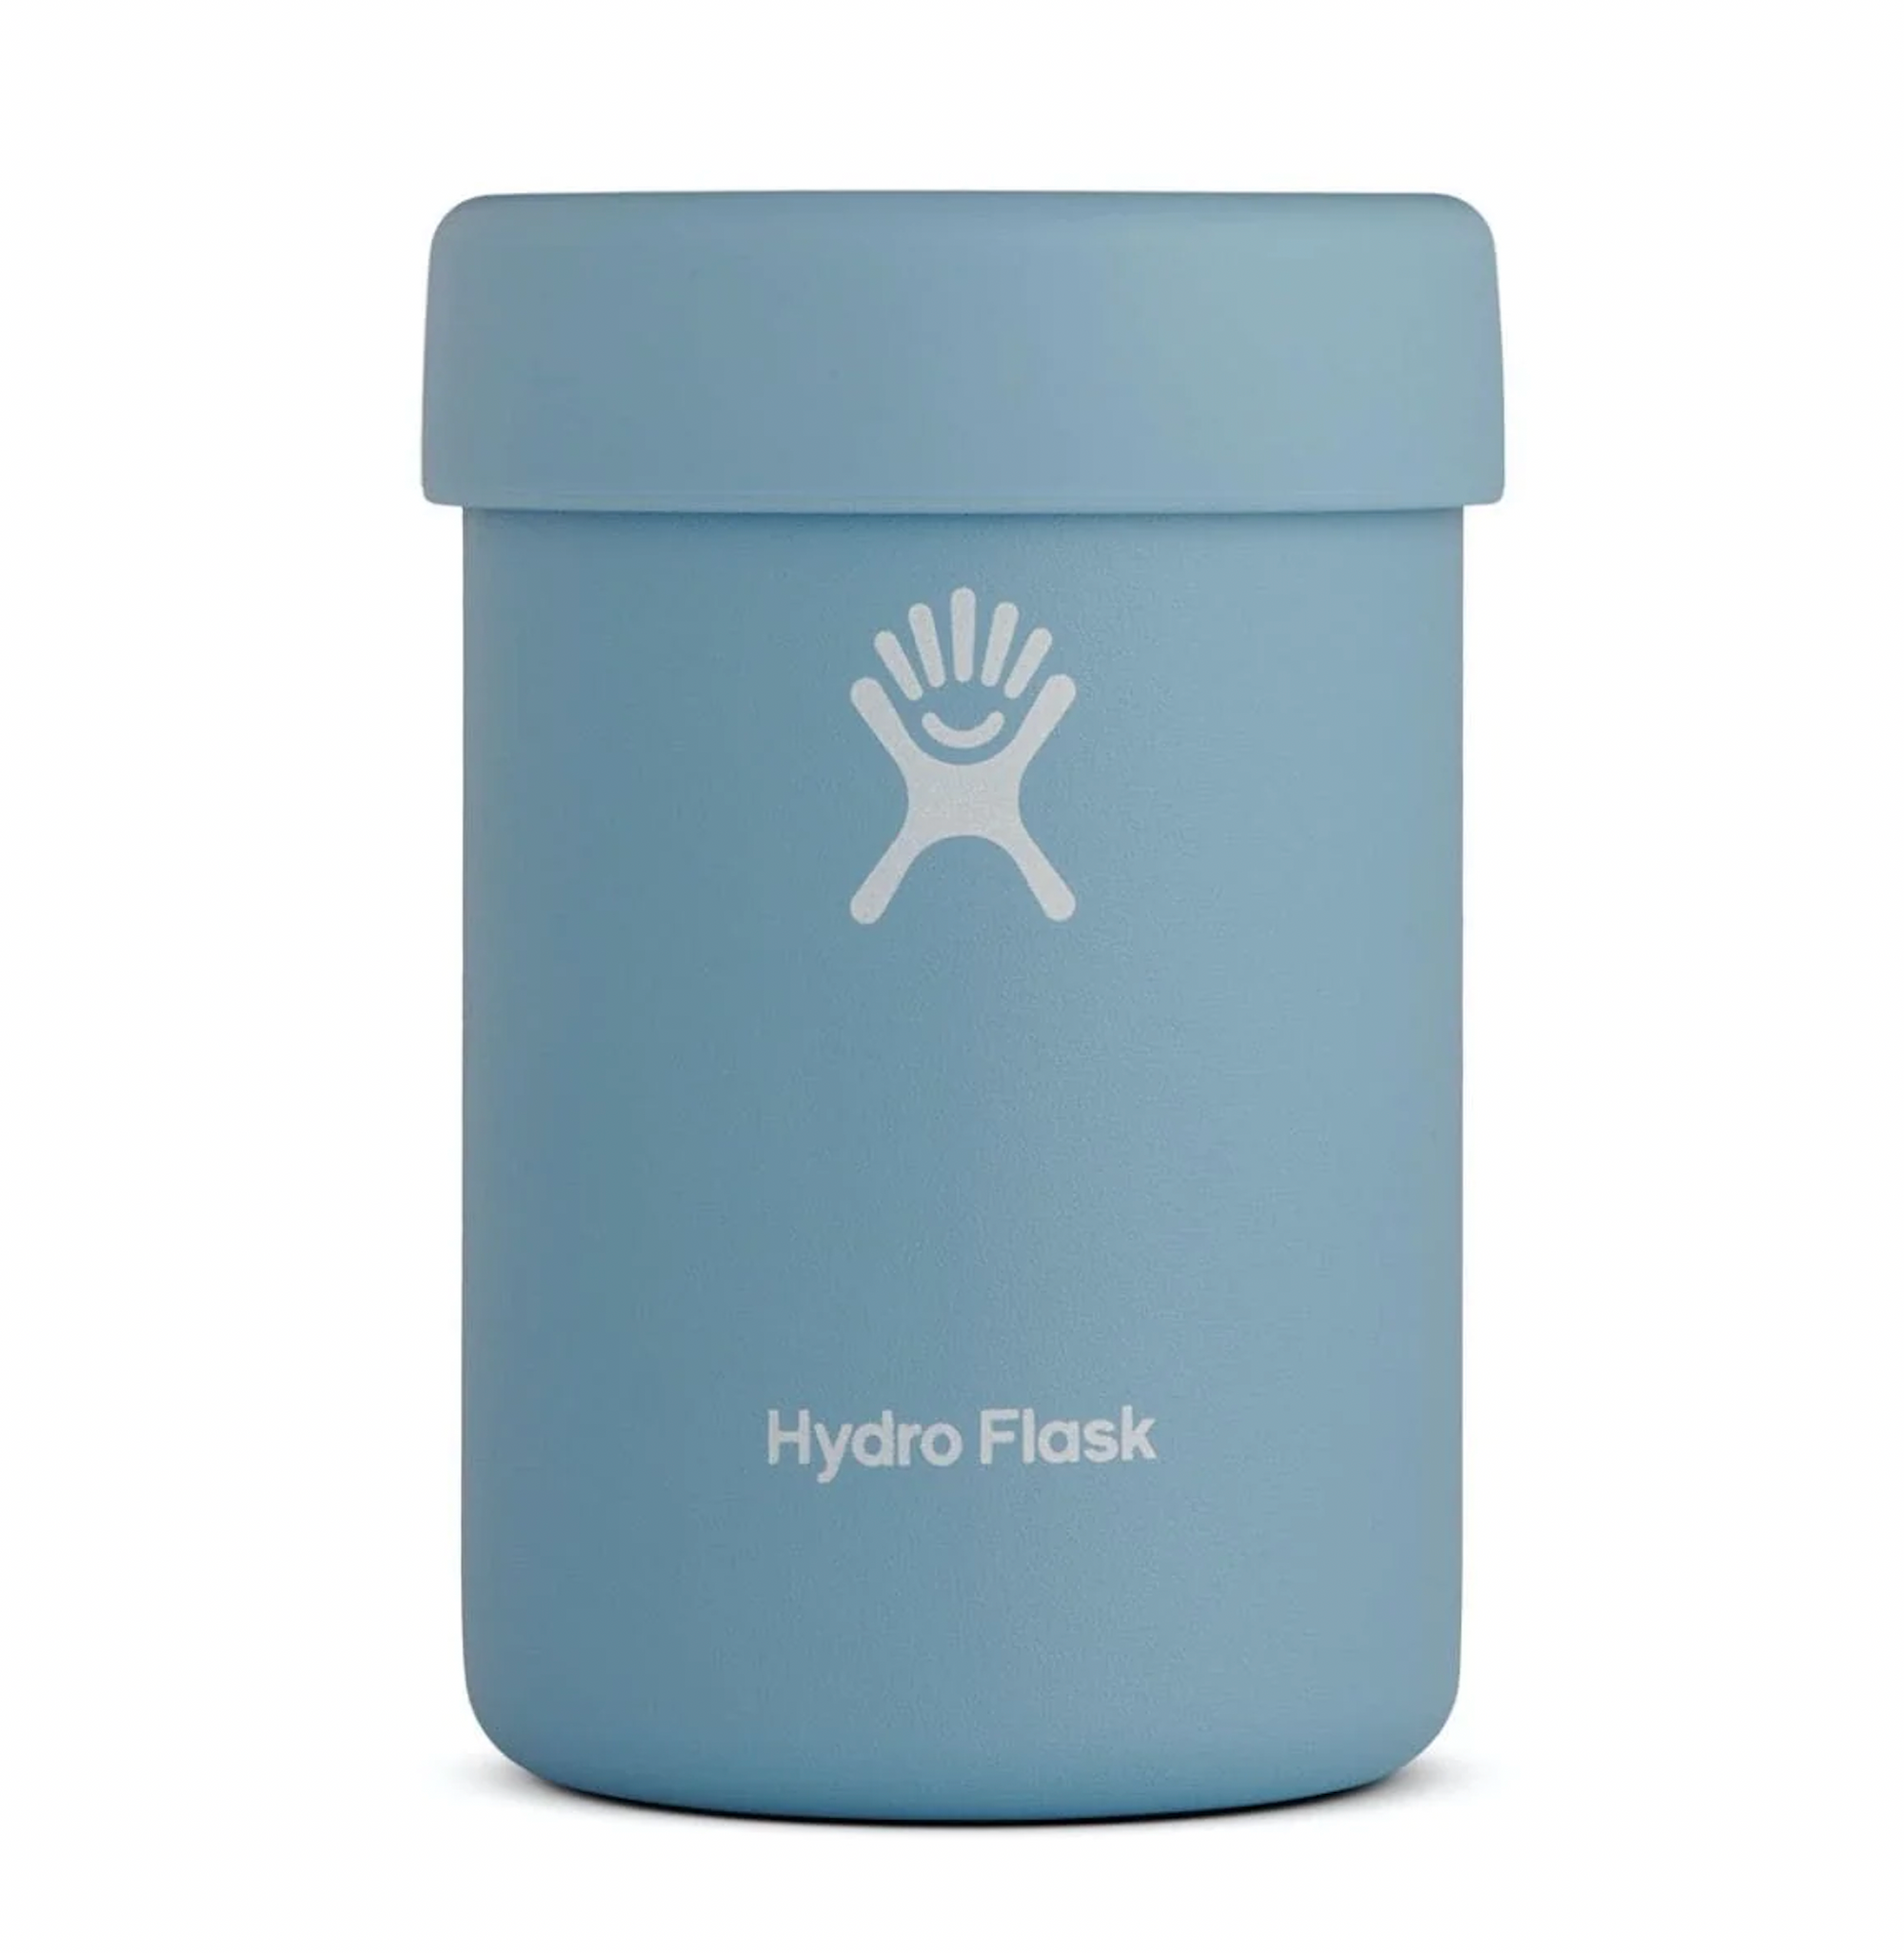 Product Info: Hydro Flask Cooler Cup